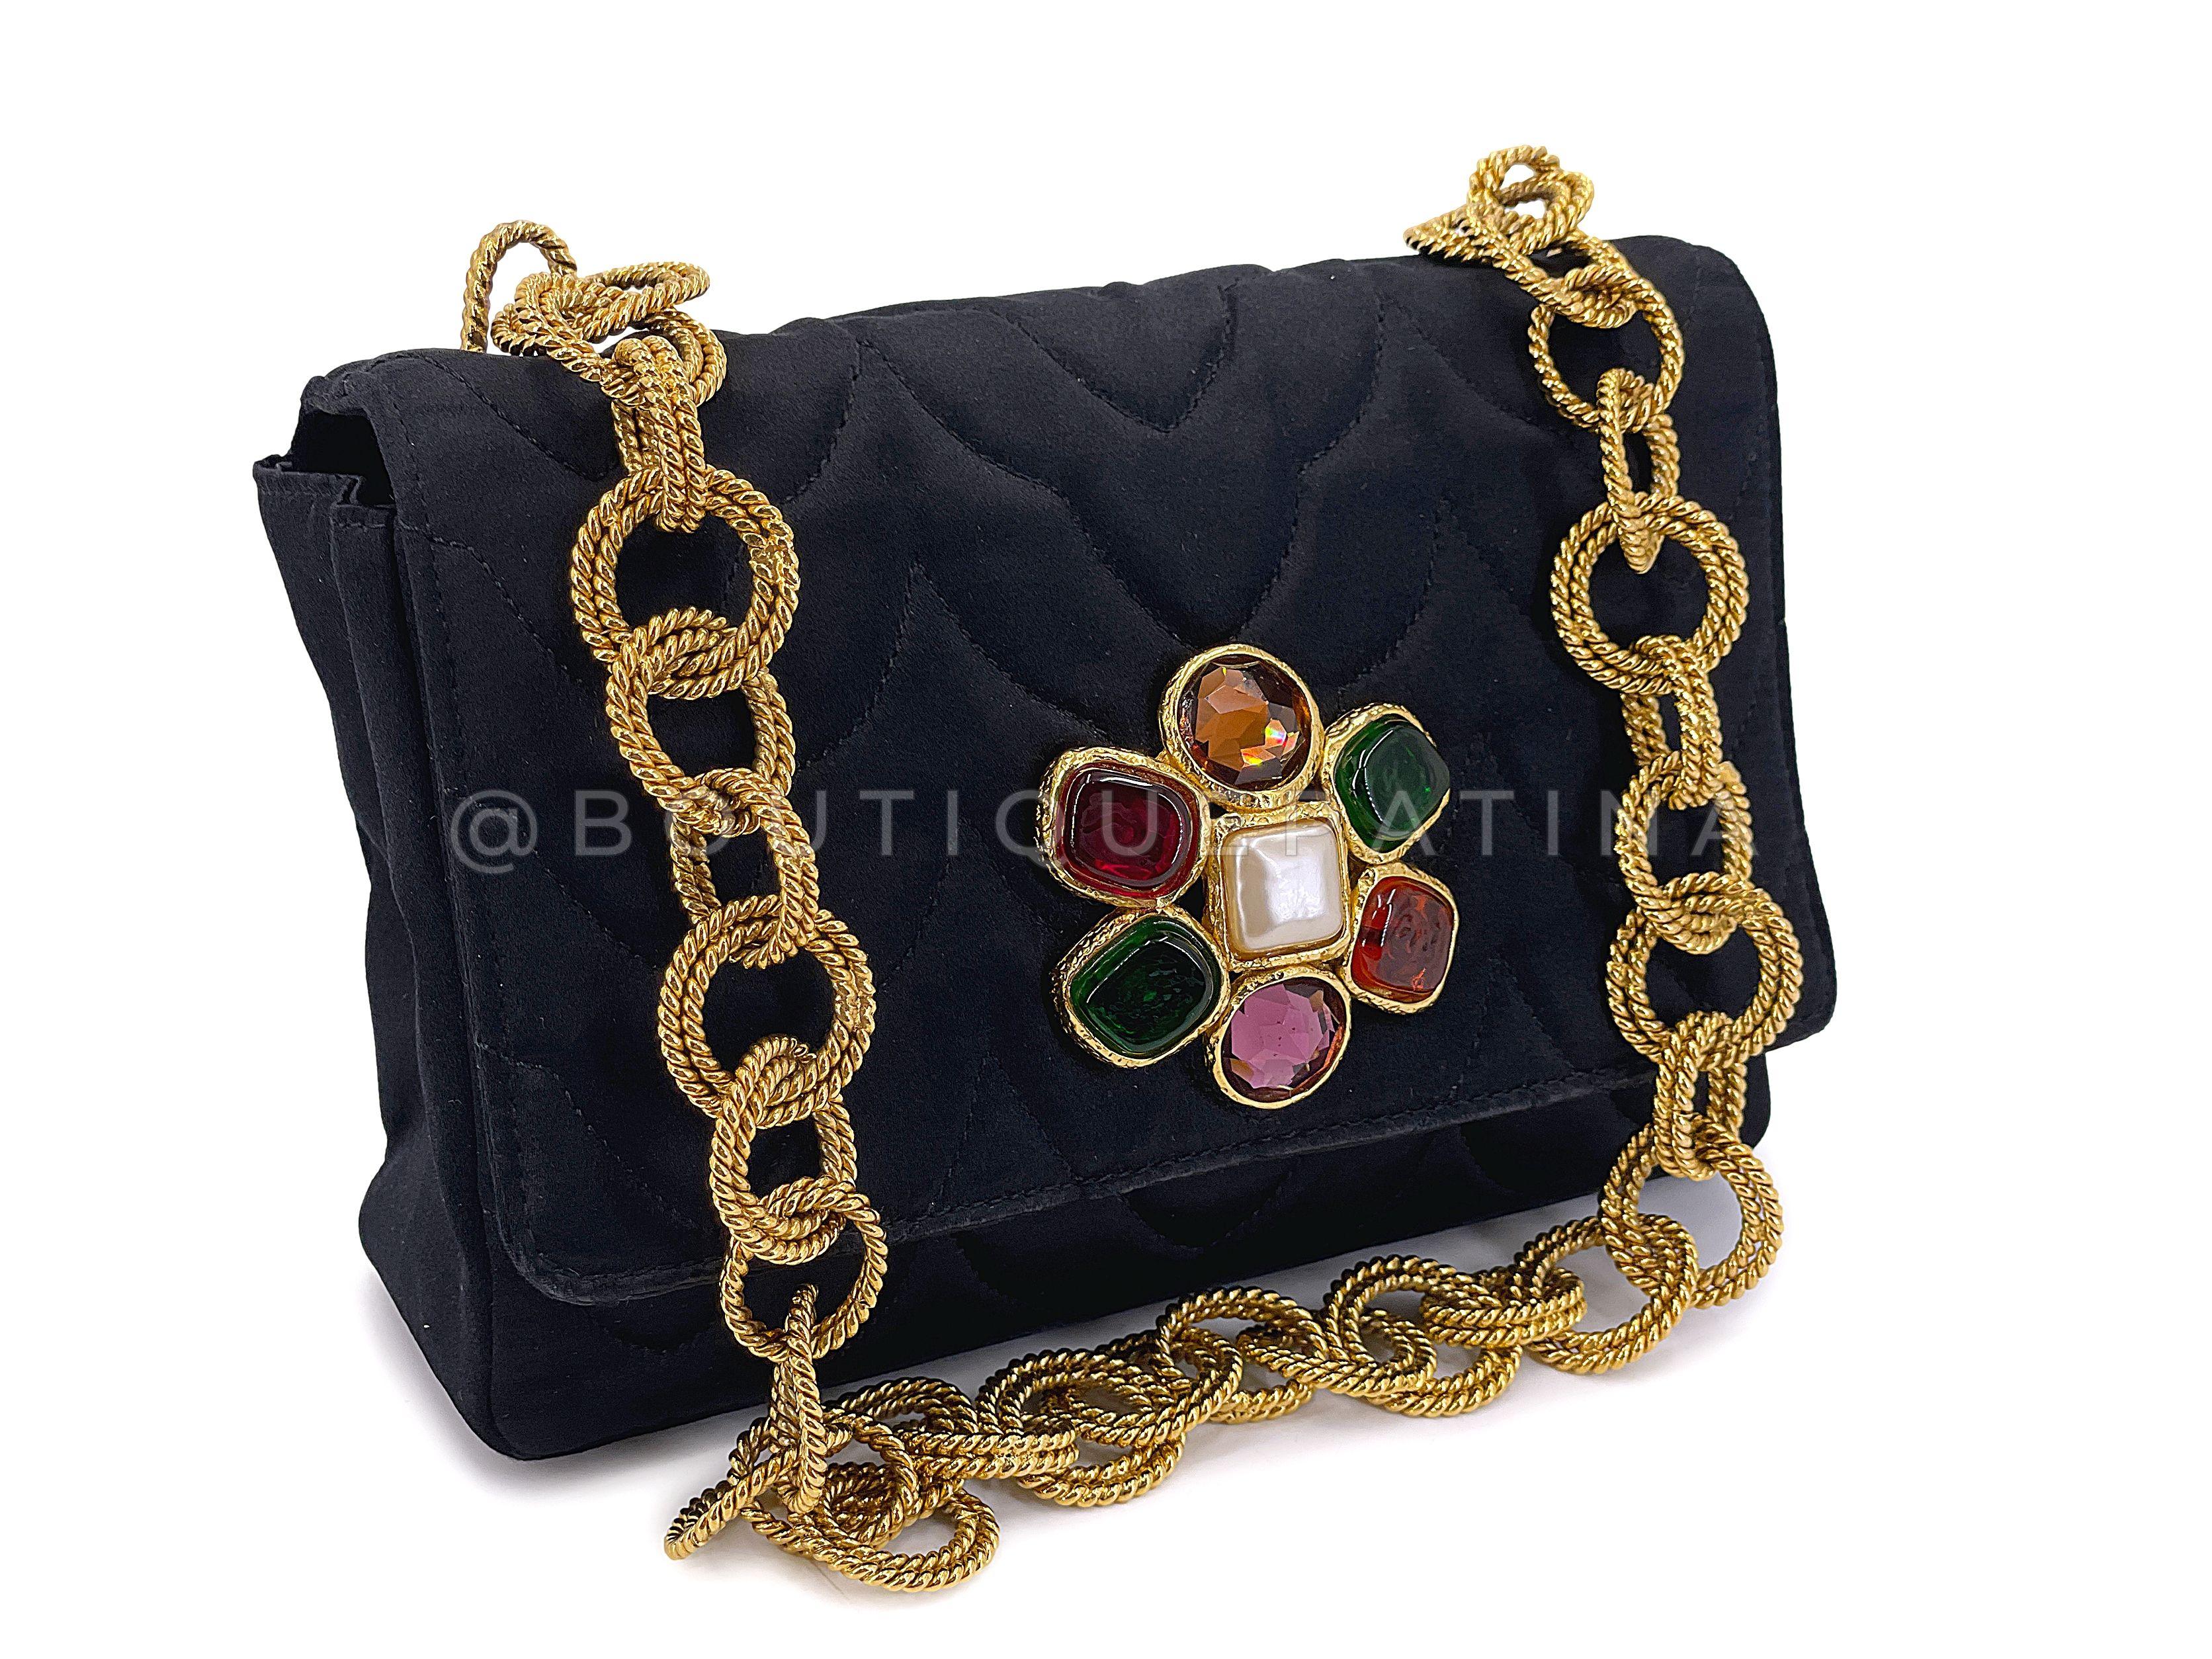 Store item: 67830
Chanel 1991 Vintage Black Quilted Satin Jeweled Gripoix Flap Bag GHW is a collectible, rare item especially in excellent condition as found here.

For 20 years, Boutique Patina has specialized in sourcing and curating the most